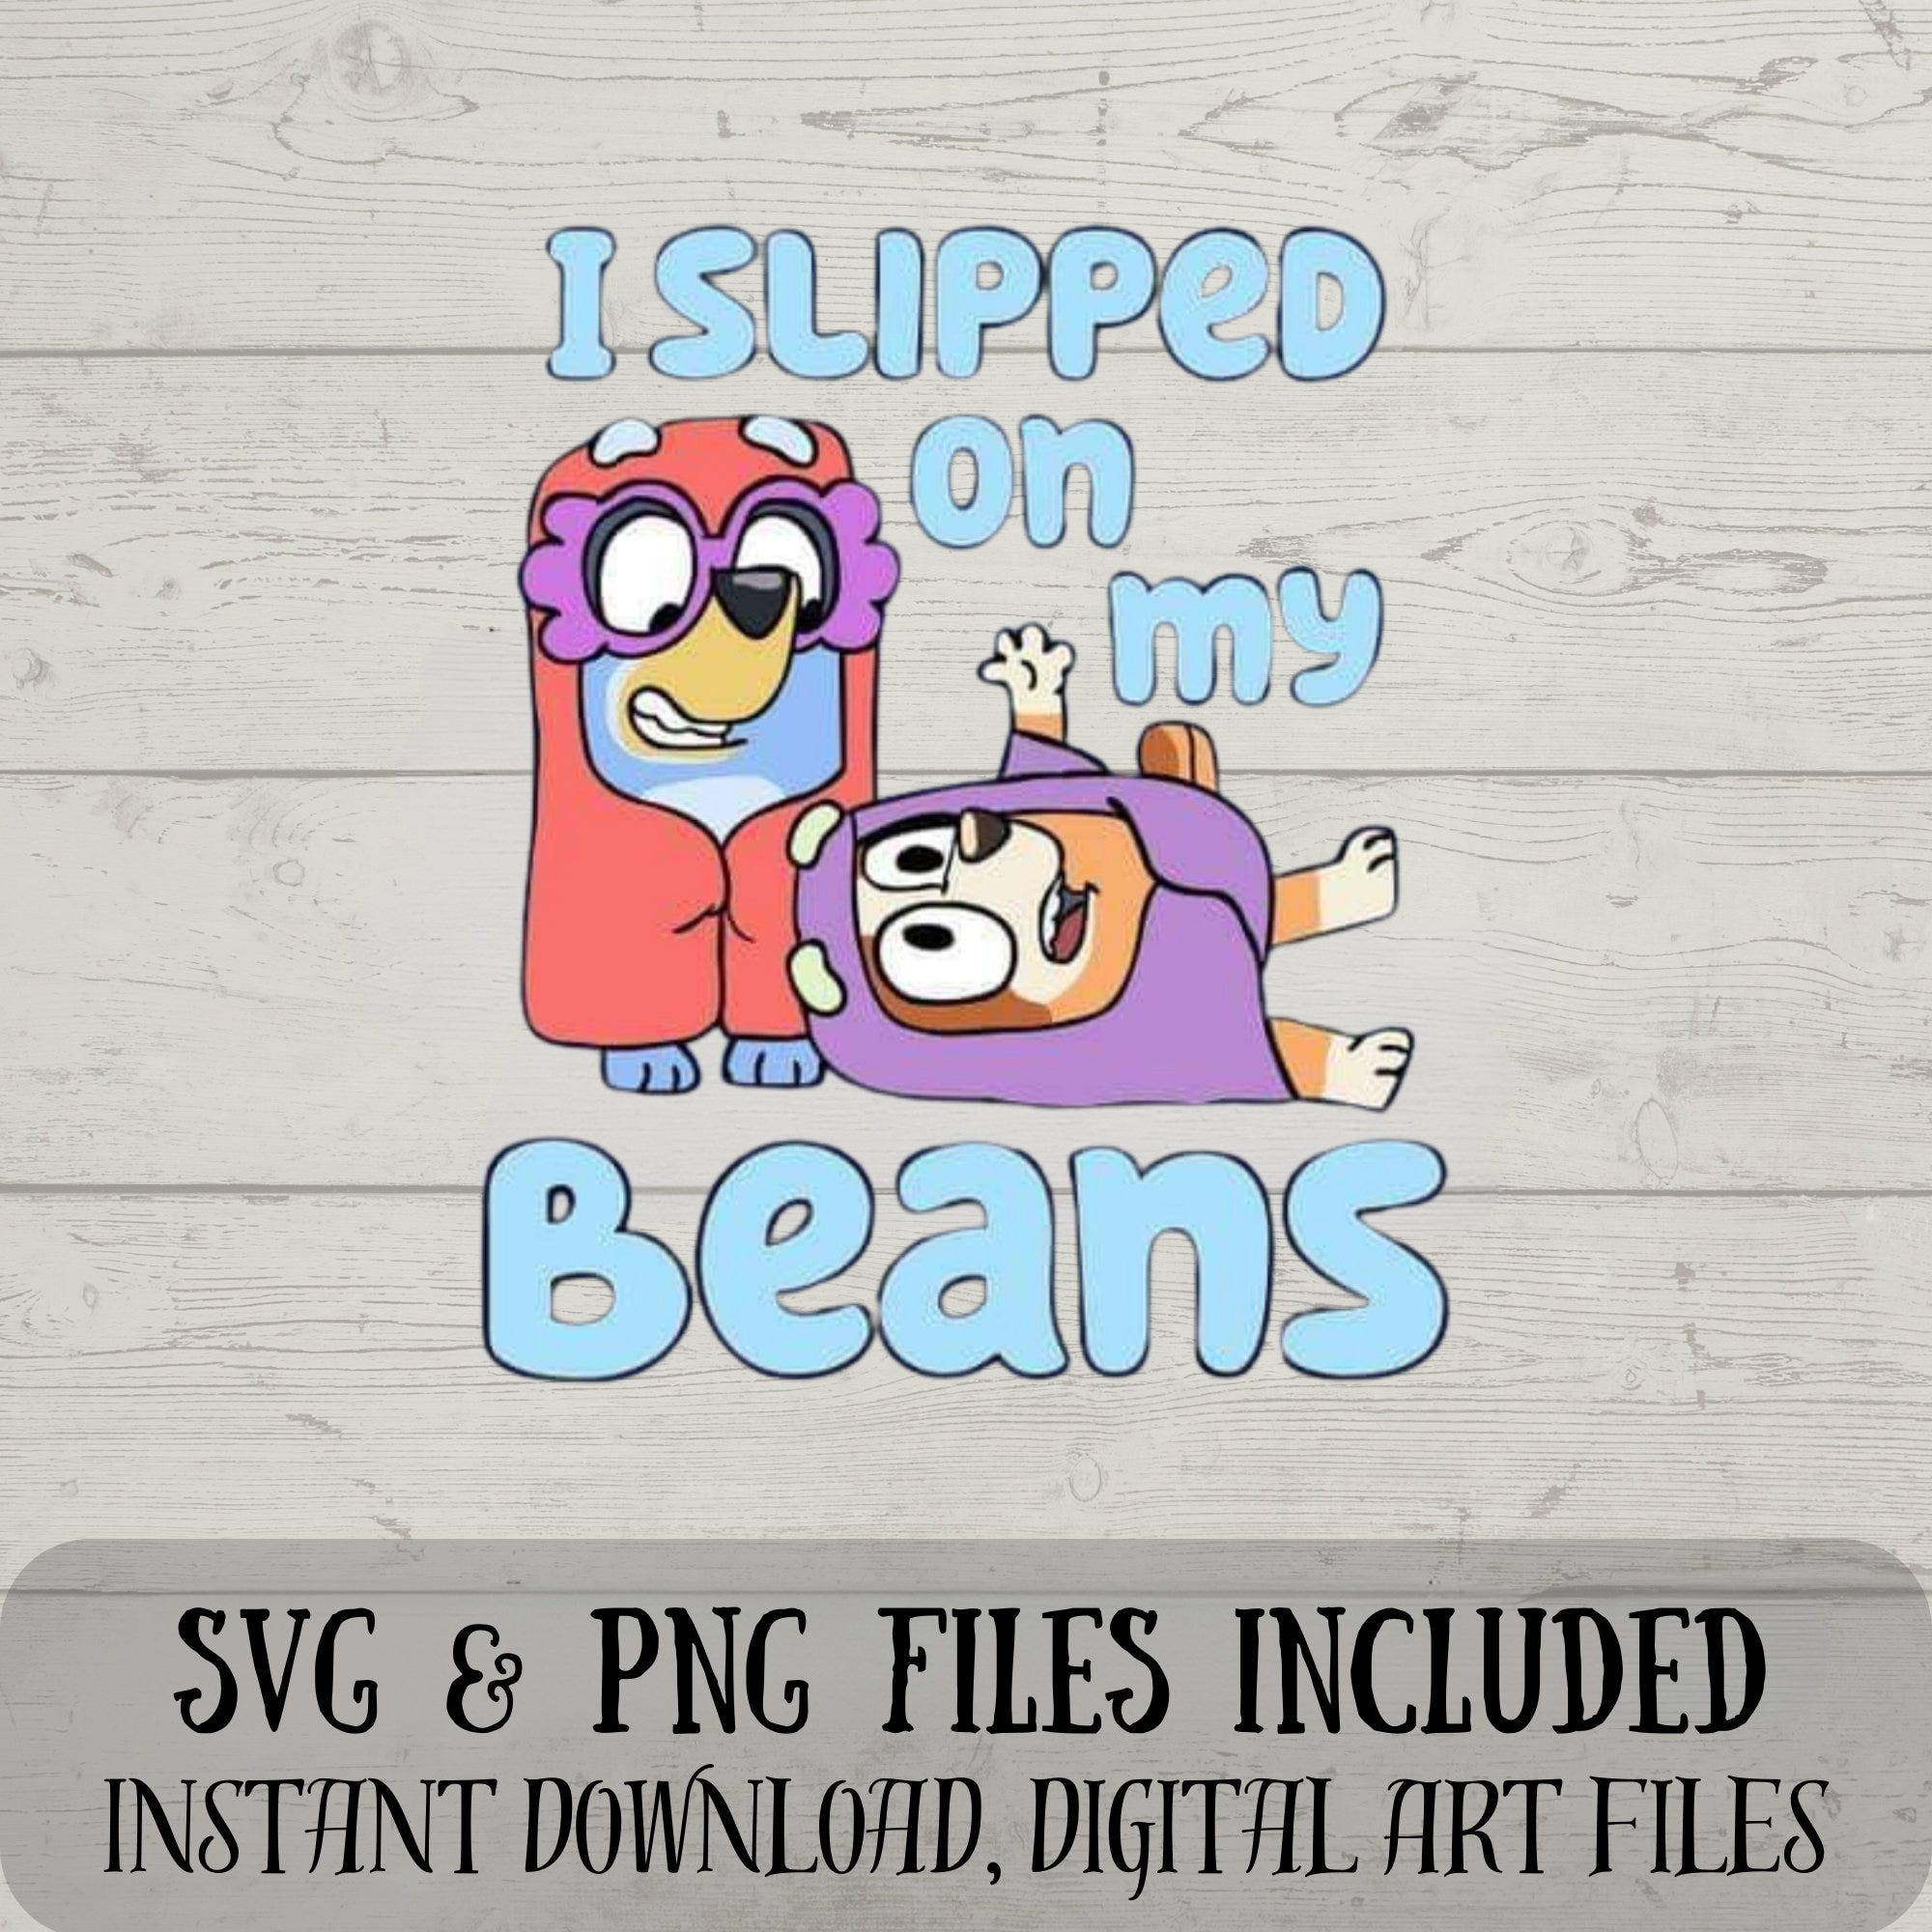 Slipped on my Beans SVG - The Grannies SVG - Bluey SVG - Funny quotes - Digital Download Fun with Crafting - svg & png files included